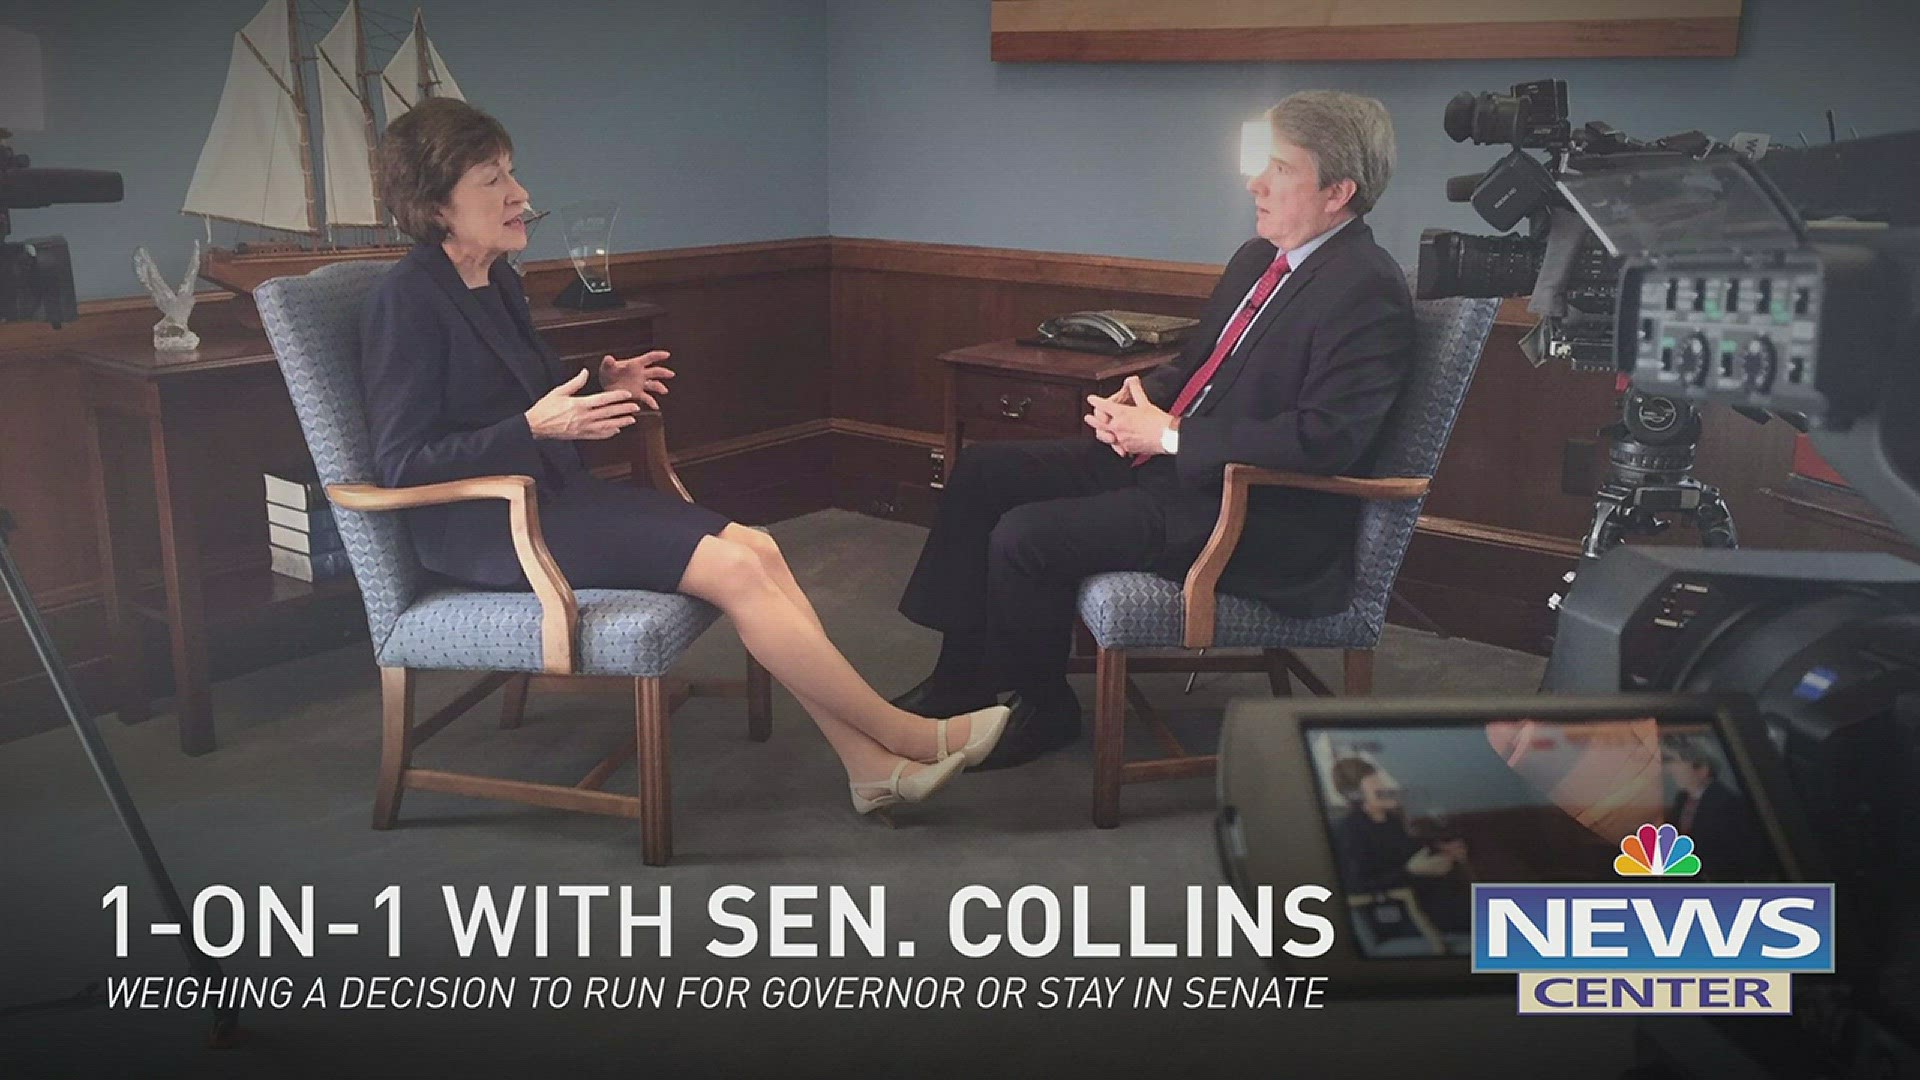 Pat Callaghan sits down with Susan Collins